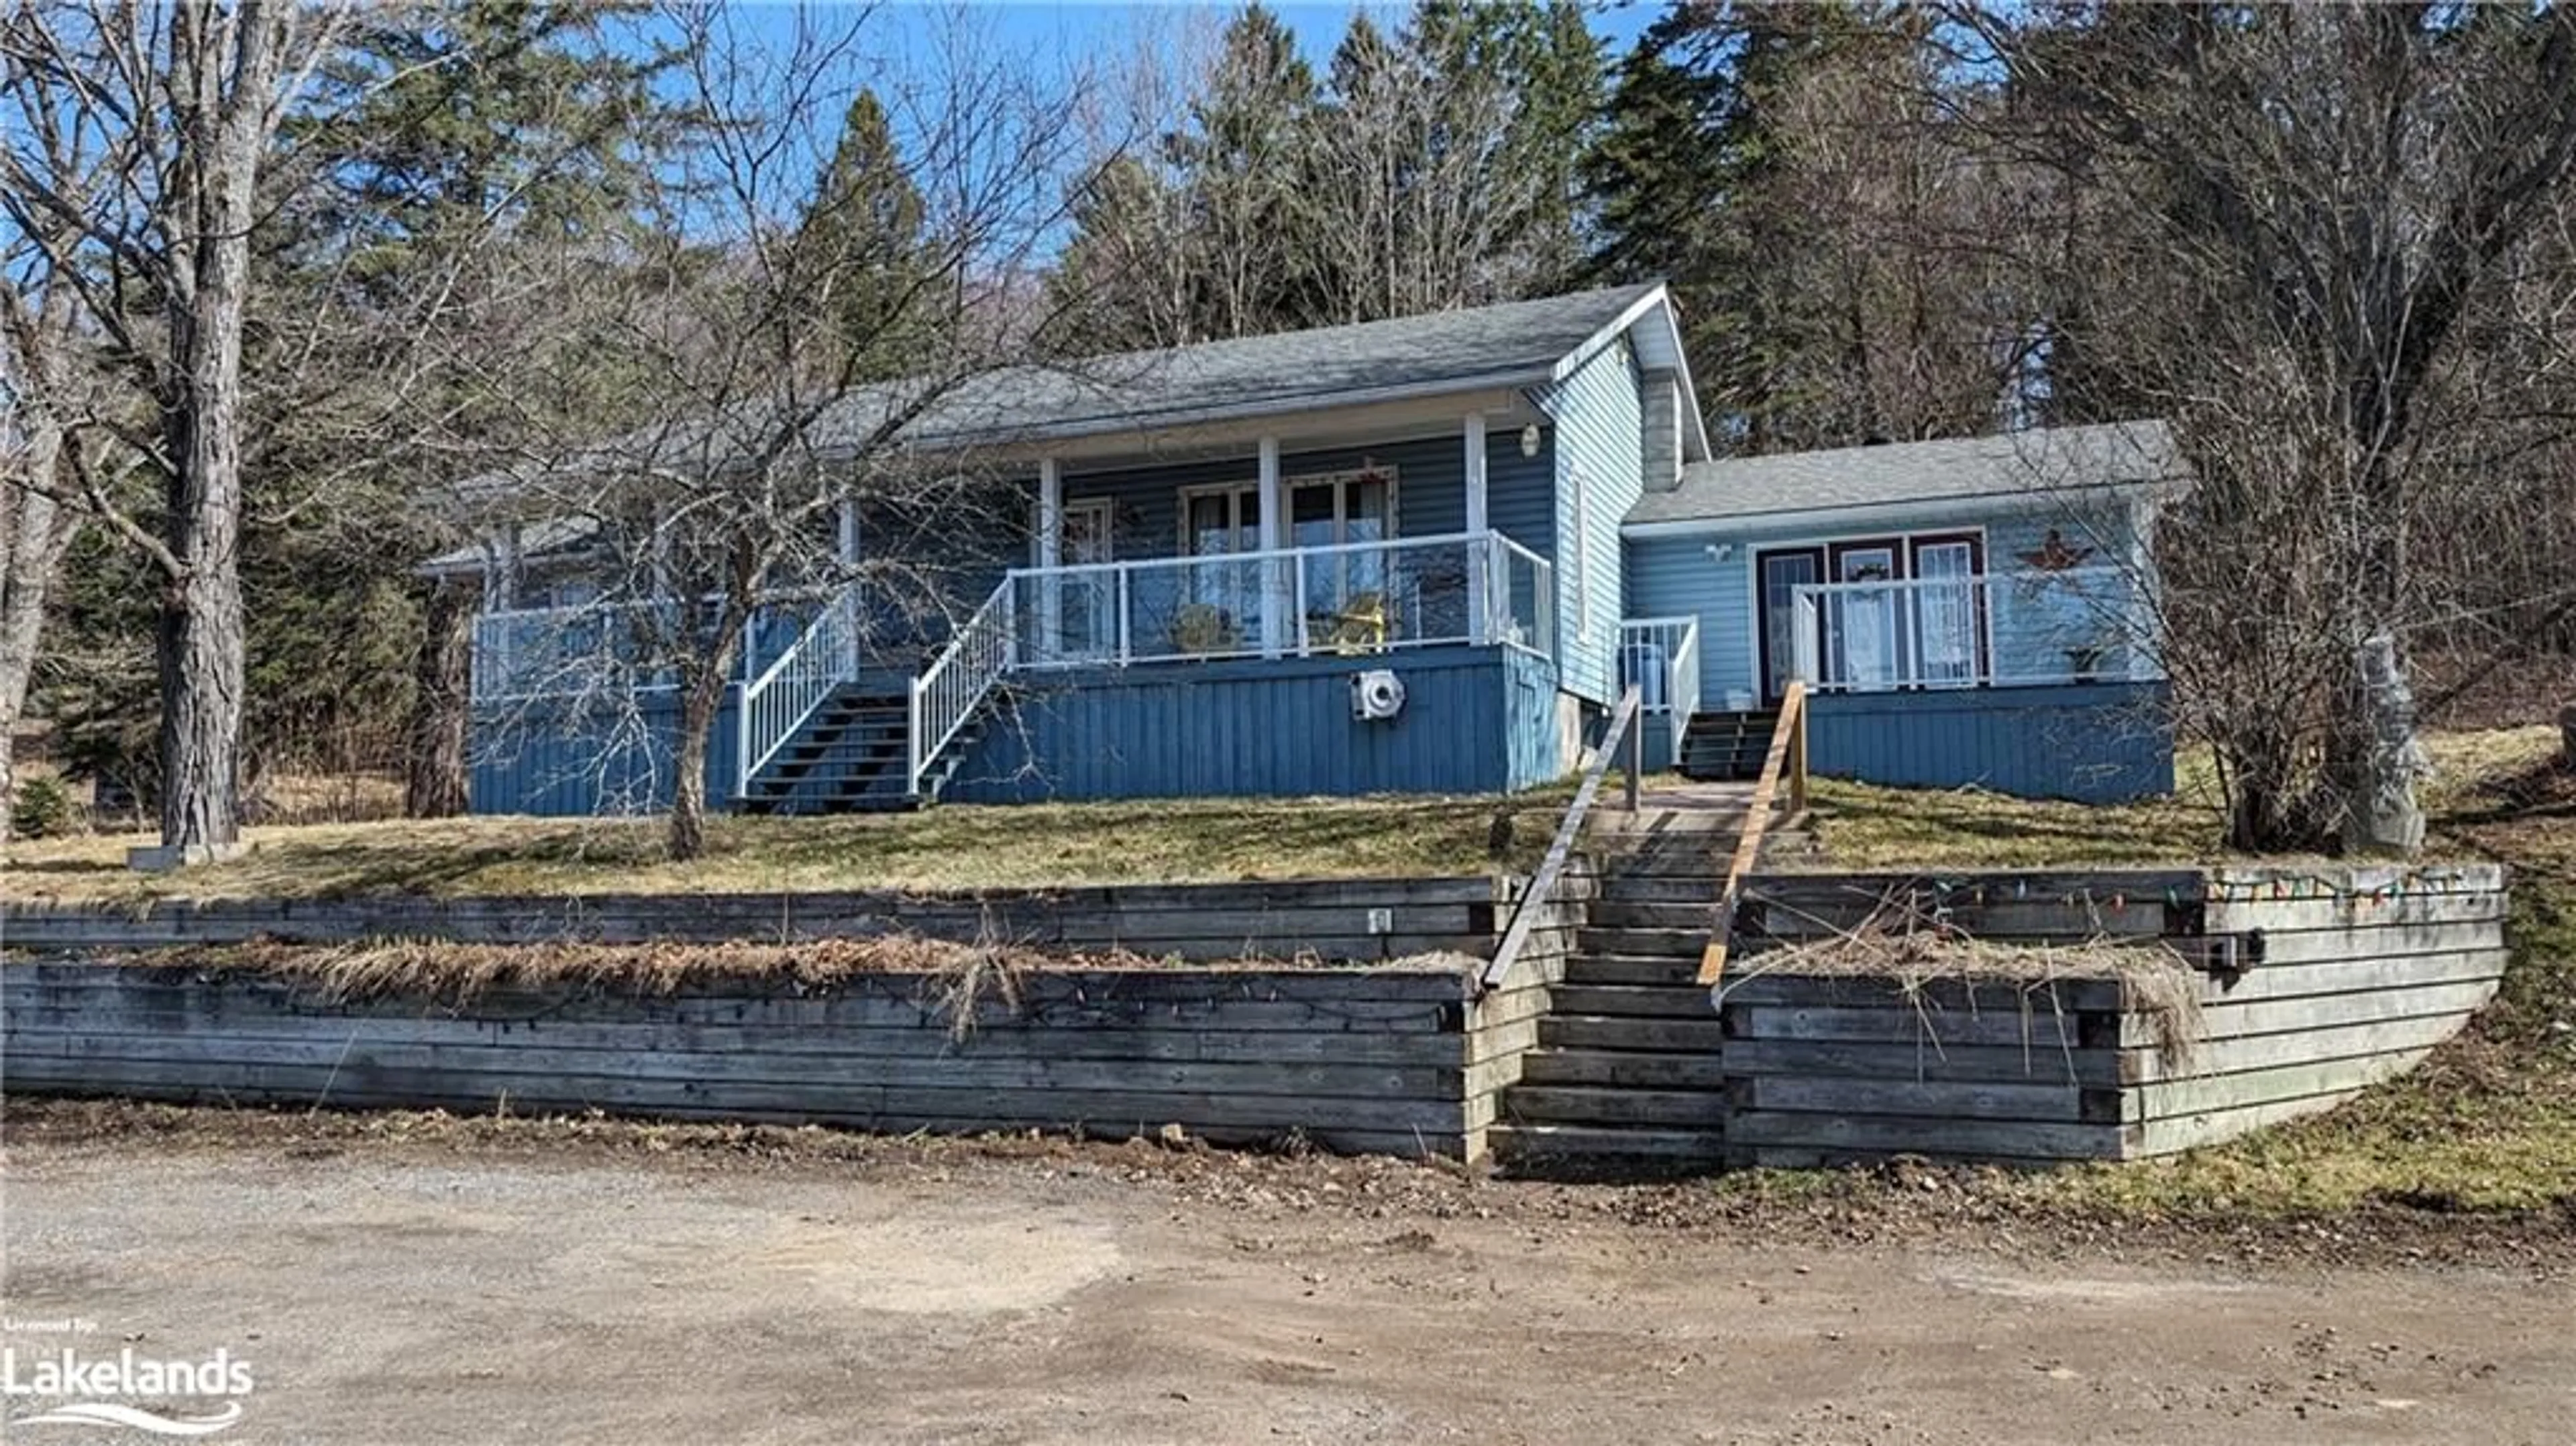 Cottage for 970 Old Muskoka Rd, Utterson Ontario P0B 1M0